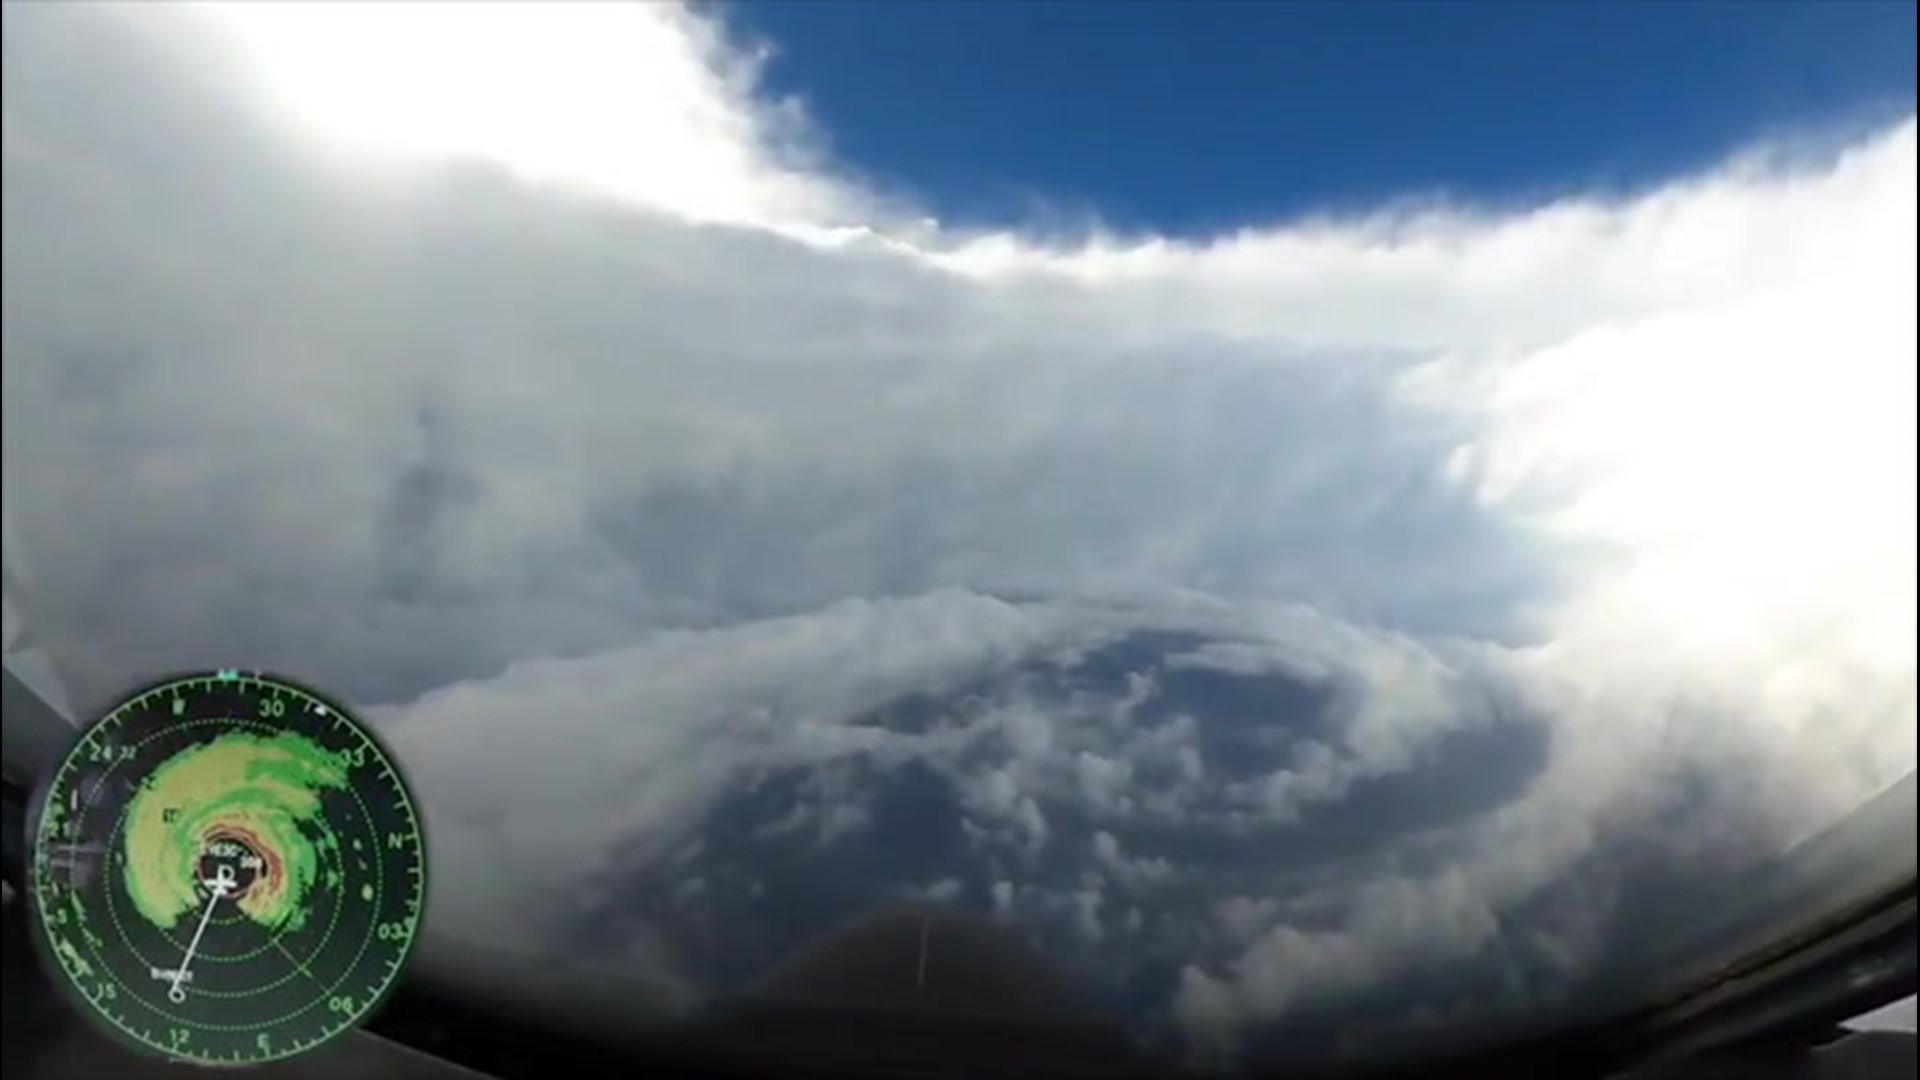 As Hurricane Hunters punched through Epsilon's eyewall on Oct. 21, they found themselves under a blue sky, surrounded by clouds that are sometimes described as the 'stadium effect.'